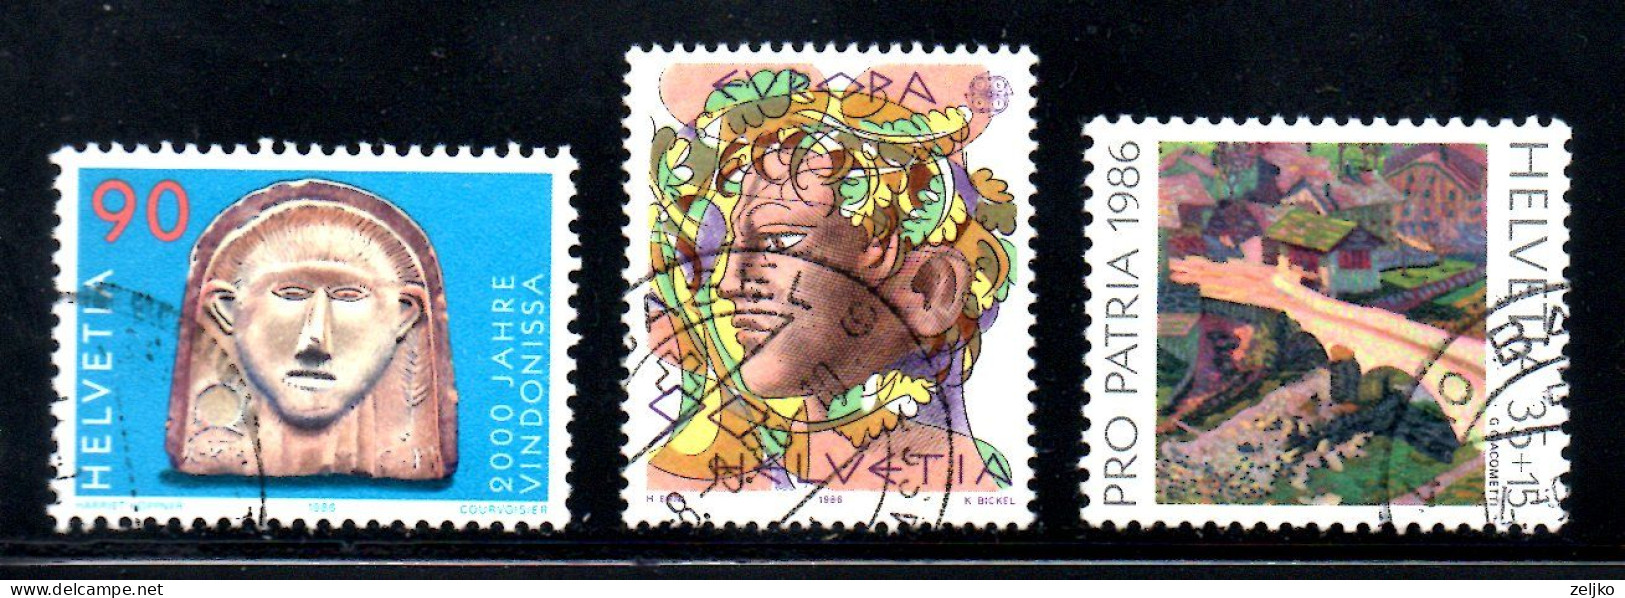 Switzerland, Used, 1986, Michel 1311, 1316, 1317, Lot - Covers & Documents